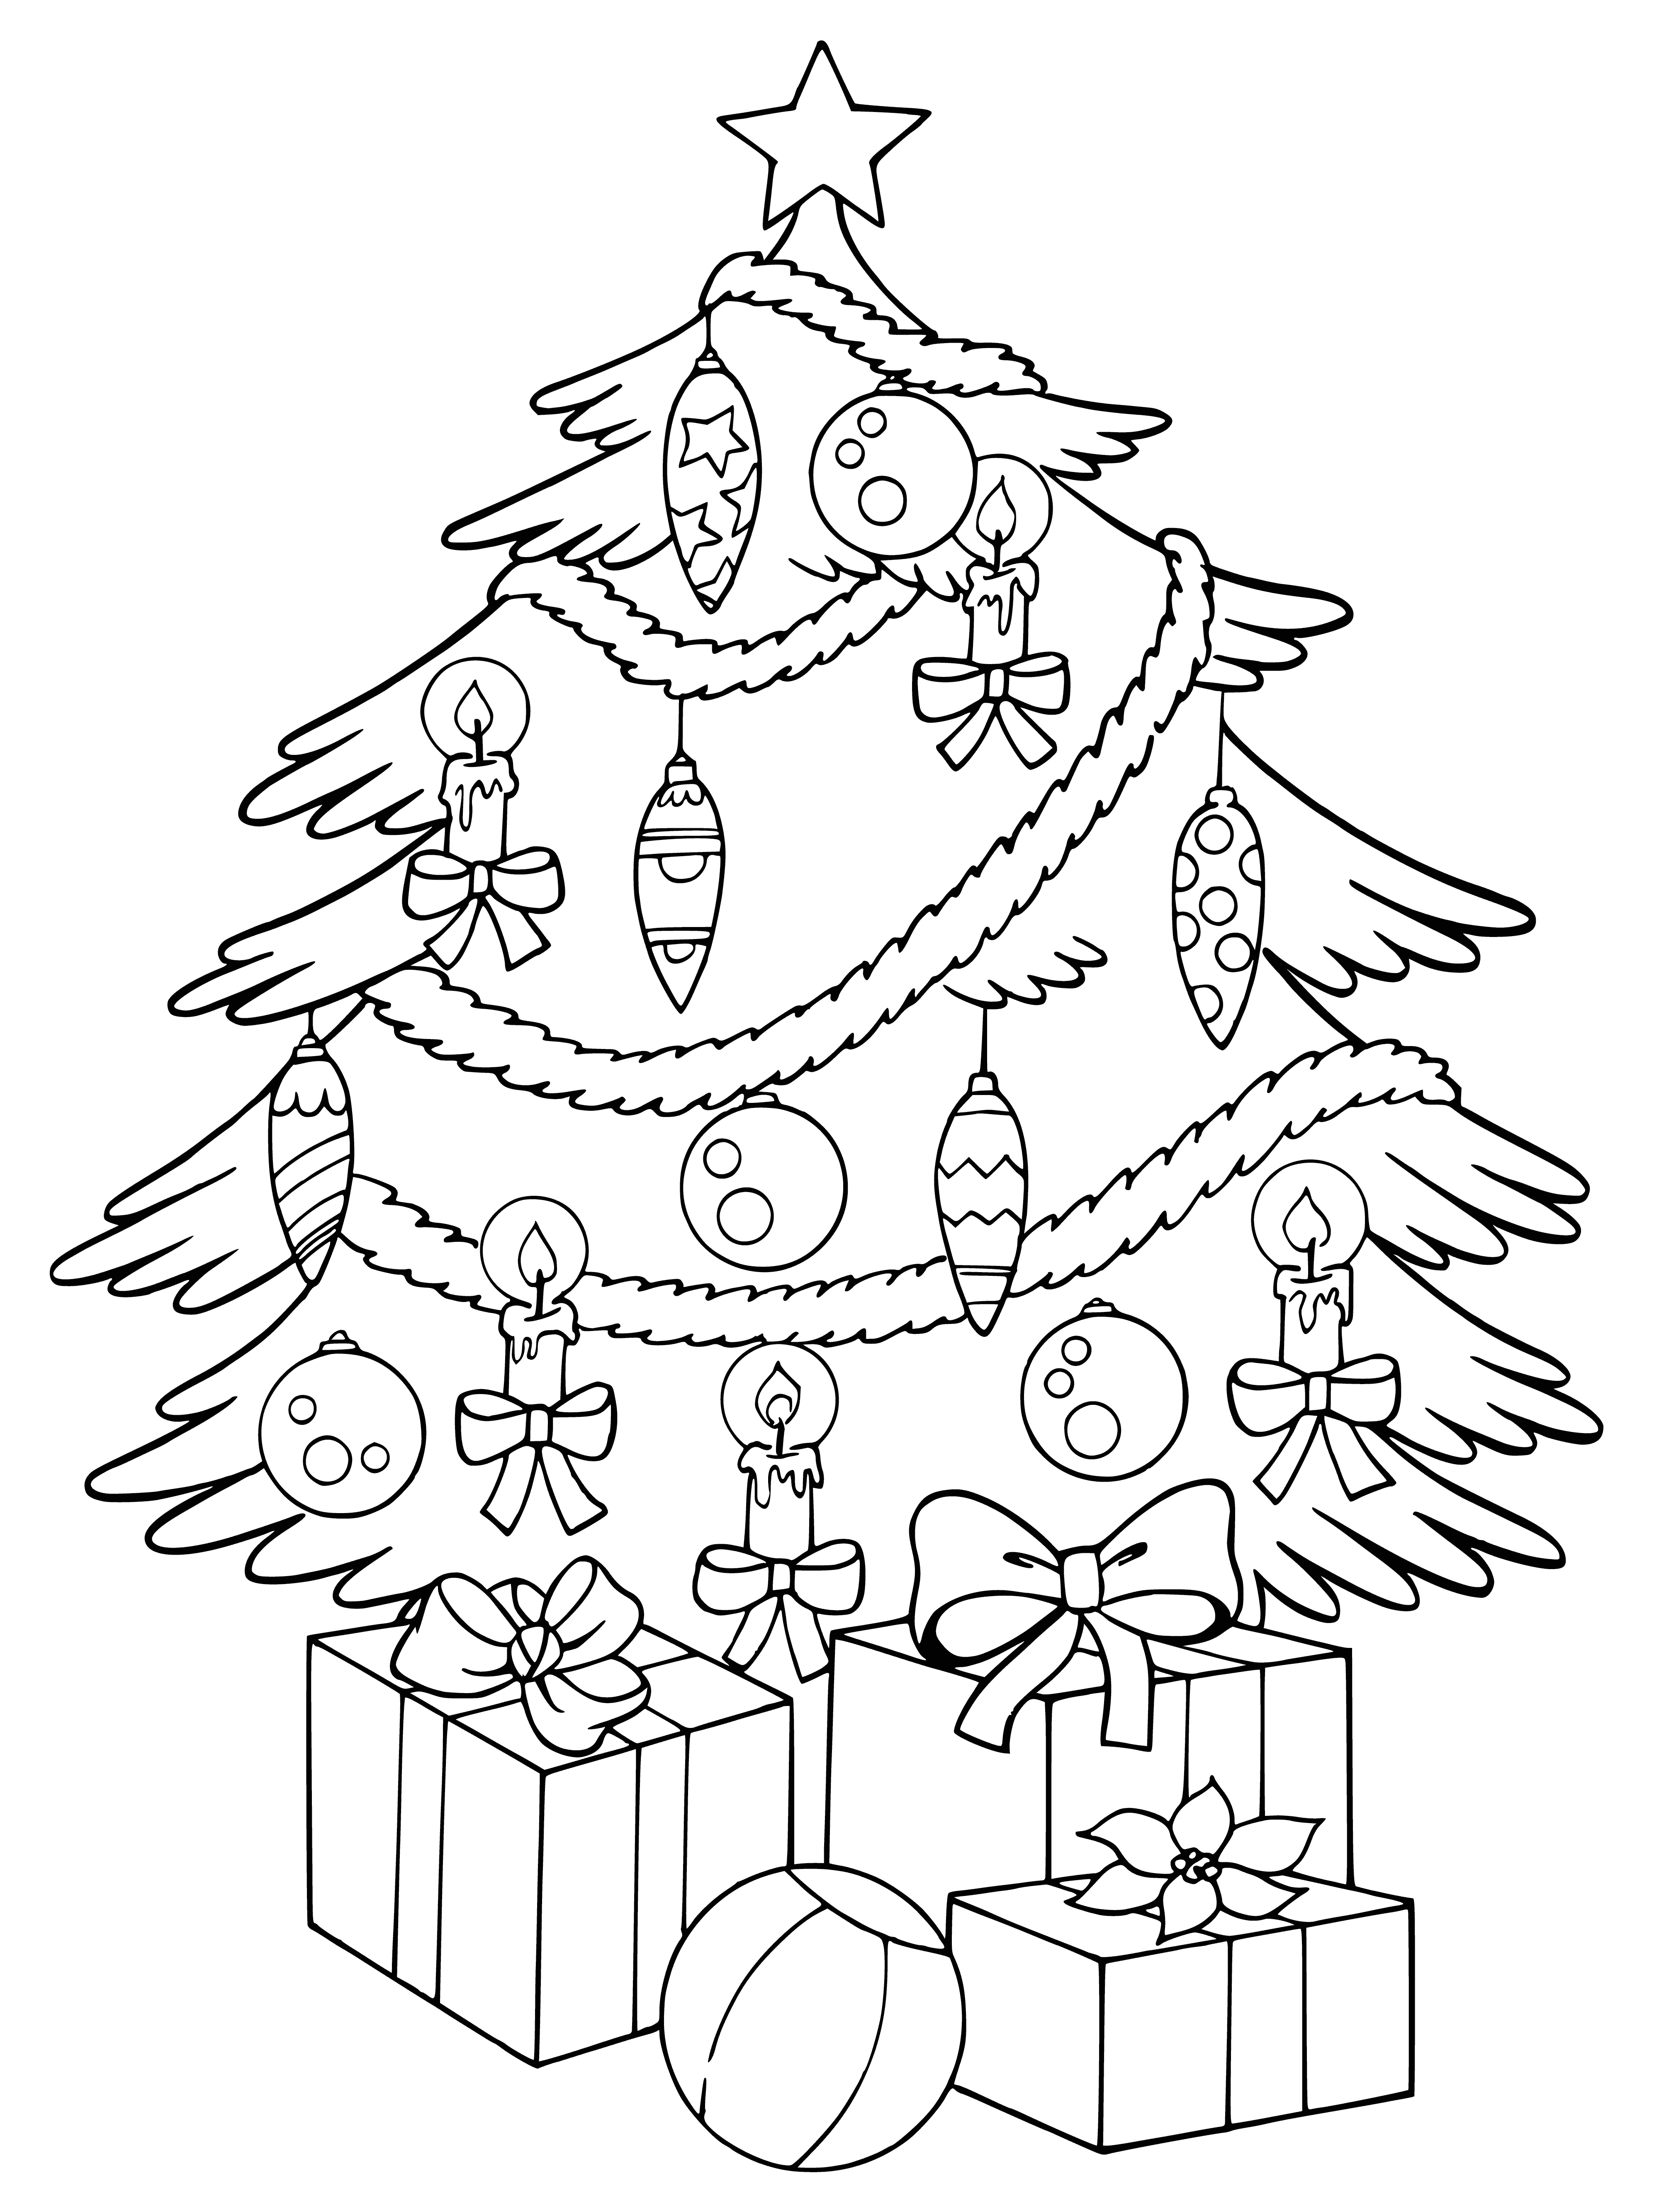 coloring page: Coloring pages depict a beautiful tree adorned with ornaments, topped with a star, in traditional Christmas colors.